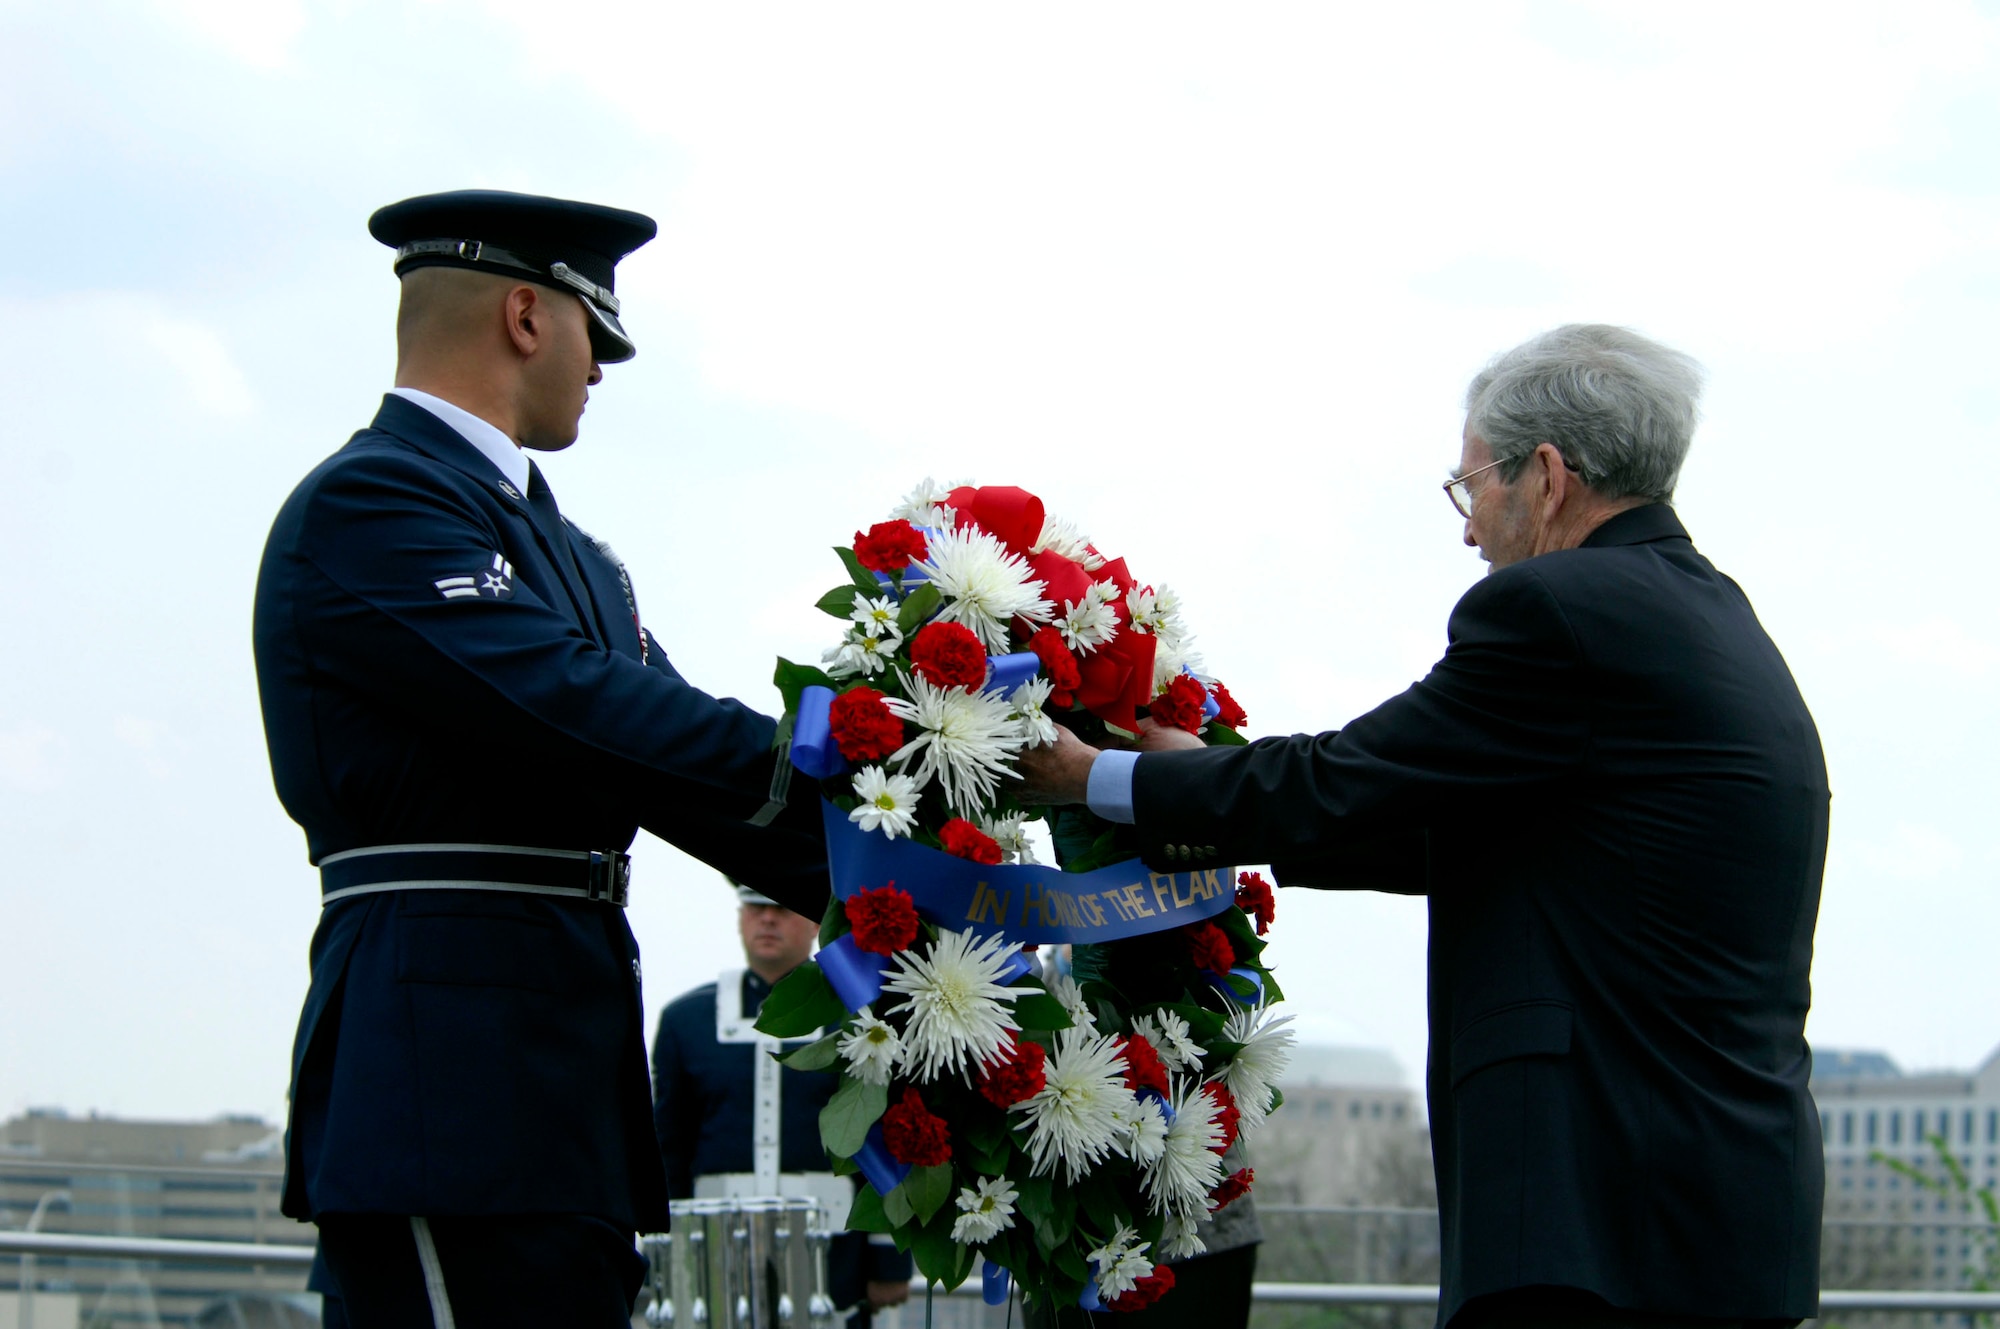 Airman 1st Class Kirk Campbell and former 1st Lt. Edward L. "Mac" McNally place a wreath at the Air Force Memorial April 24. The ceremony honored Lieutenant Mcnally and other crew members of the "Flak Man" B-24 Liberator from World War II. (U.S. Air Force photo/Tech. Sgt. Cohen A. Young)